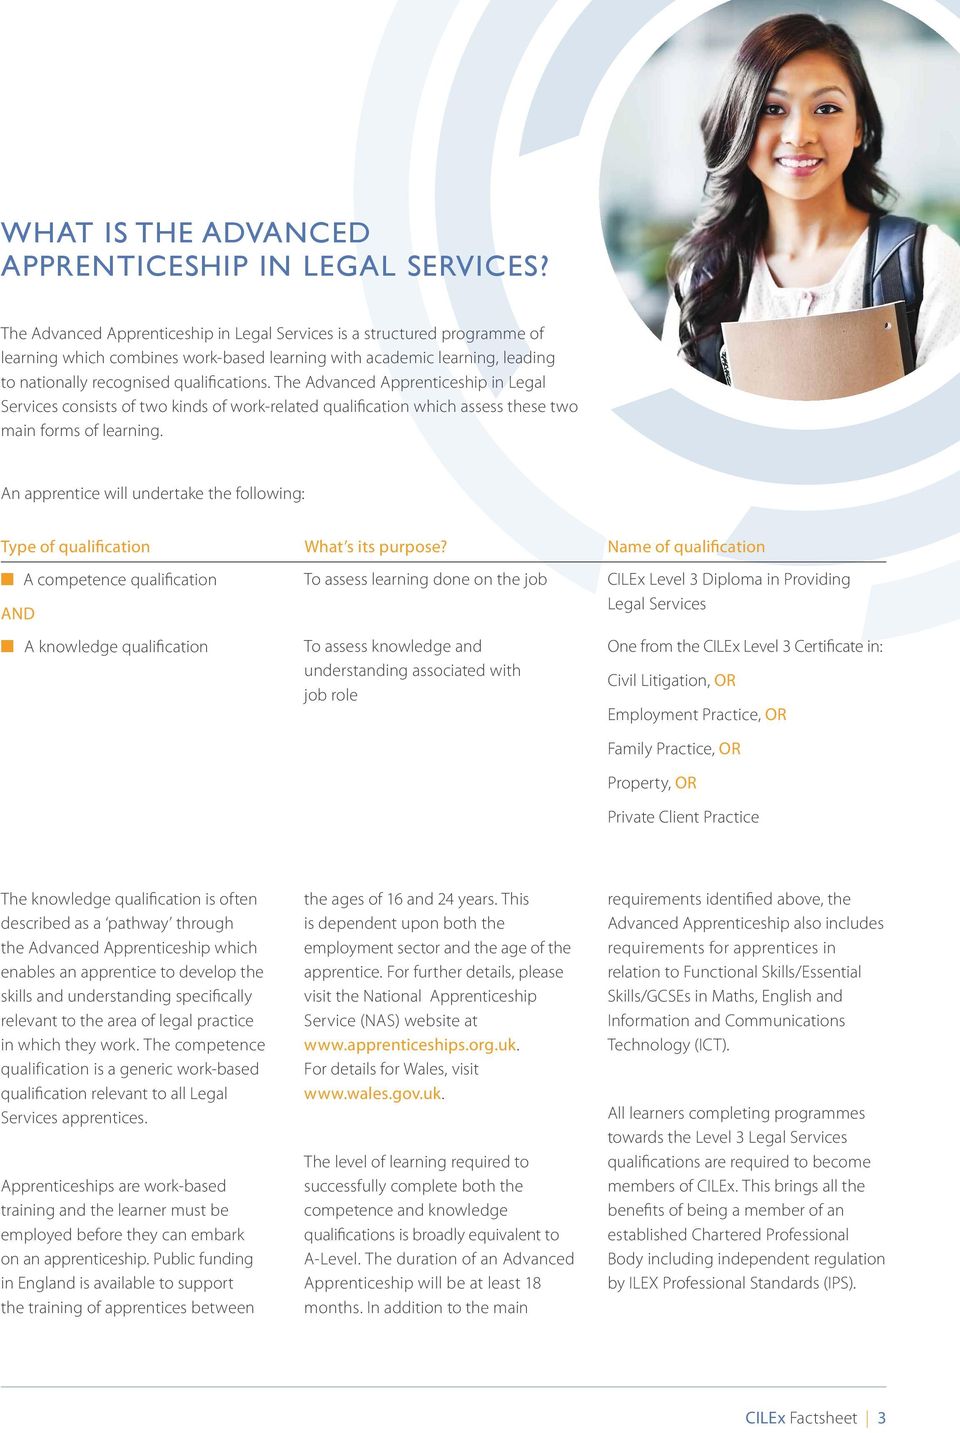 The Advanced Apprenticeship in Legal Services consists of two kinds of work-related qualification which assess these two main forms of learning.